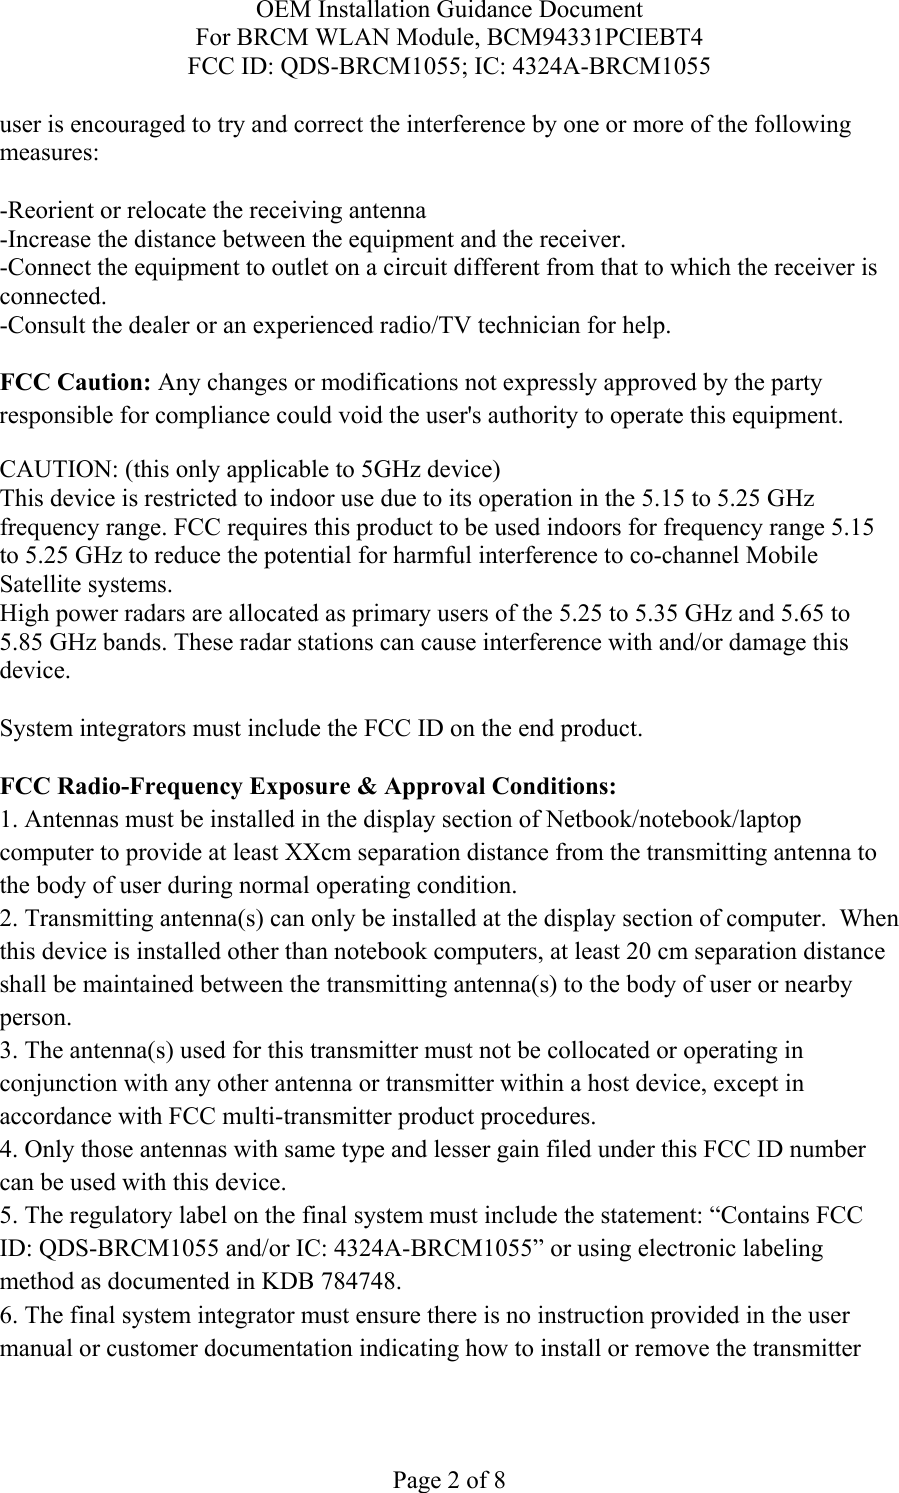 OEM Installation Guidance Document For BRCM WLAN Module, BCM94331PCIEBT4 FCC ID: QDS-BRCM1055; IC: 4324A-BRCM1055  Page 2 of 8 user is encouraged to try and correct the interference by one or more of the following measures:   -Reorient or relocate the receiving antenna -Increase the distance between the equipment and the receiver. -Connect the equipment to outlet on a circuit different from that to which the receiver is connected. -Consult the dealer or an experienced radio/TV technician for help.  FCC Caution: Any changes or modifications not expressly approved by the party responsible for compliance could void the user&apos;s authority to operate this equipment. CAUTION: (this only applicable to 5GHz device) This device is restricted to indoor use due to its operation in the 5.15 to 5.25 GHz frequency range. FCC requires this product to be used indoors for frequency range 5.15 to 5.25 GHz to reduce the potential for harmful interference to co-channel Mobile Satellite systems. High power radars are allocated as primary users of the 5.25 to 5.35 GHz and 5.65 to 5.85 GHz bands. These radar stations can cause interference with and/or damage this device.  System integrators must include the FCC ID on the end product.   FCC Radio-Frequency Exposure &amp; Approval Conditions: 1. Antennas must be installed in the display section of Netbook/notebook/laptop computer to provide at least XXcm separation distance from the transmitting antenna to the body of user during normal operating condition. 2. Transmitting antenna(s) can only be installed at the display section of computer.  When this device is installed other than notebook computers, at least 20 cm separation distance shall be maintained between the transmitting antenna(s) to the body of user or nearby person. 3. The antenna(s) used for this transmitter must not be collocated or operating in conjunction with any other antenna or transmitter within a host device, except in accordance with FCC multi-transmitter product procedures. 4. Only those antennas with same type and lesser gain filed under this FCC ID number can be used with this device. 5. The regulatory label on the final system must include the statement: “Contains FCC ID: QDS-BRCM1055 and/or IC: 4324A-BRCM1055” or using electronic labeling method as documented in KDB 784748. 6. The final system integrator must ensure there is no instruction provided in the user manual or customer documentation indicating how to install or remove the transmitter 